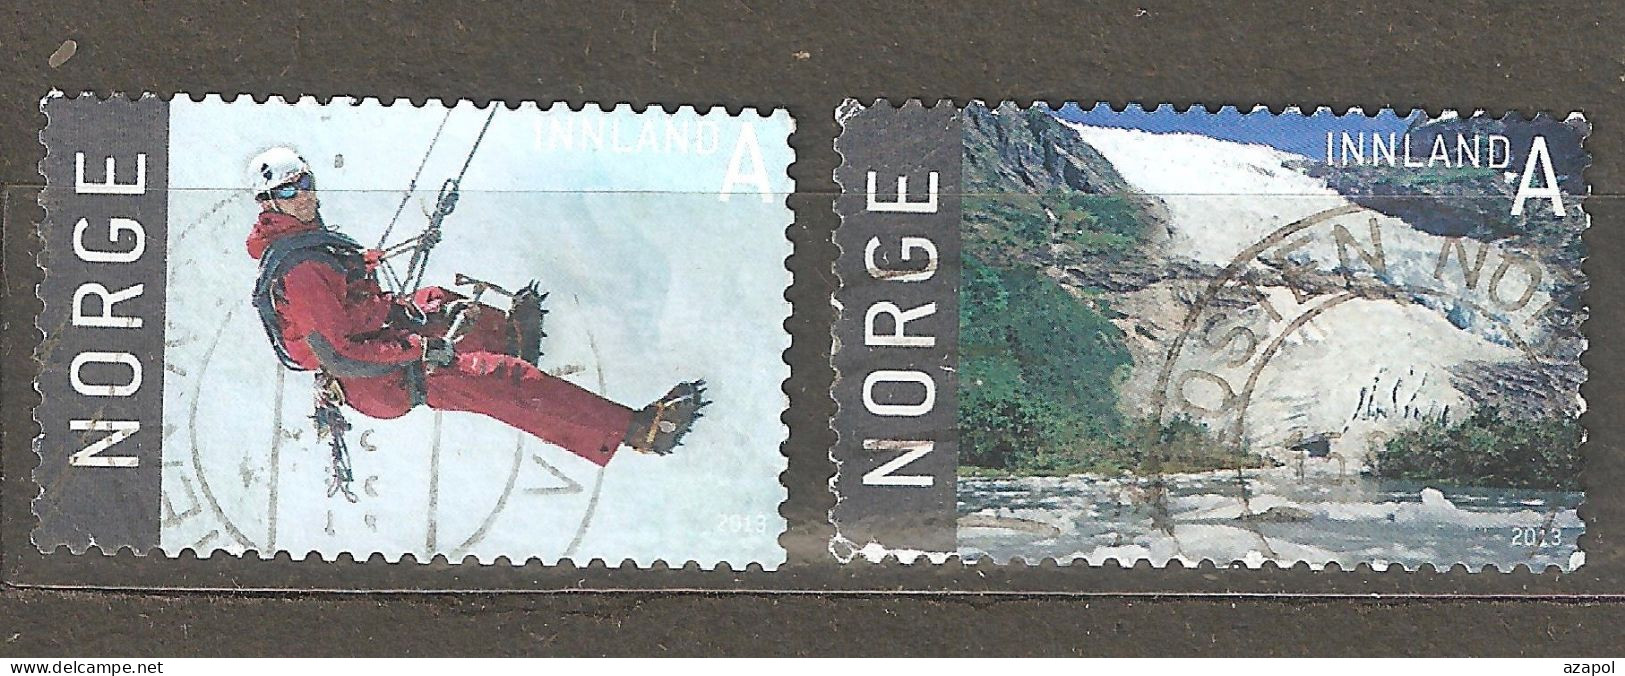 Norway: 2 Used Stamps From A Set, Tourism-a Climber On A Gletcher, Waterfall, 2013, Mi#1809-10 - Gebraucht